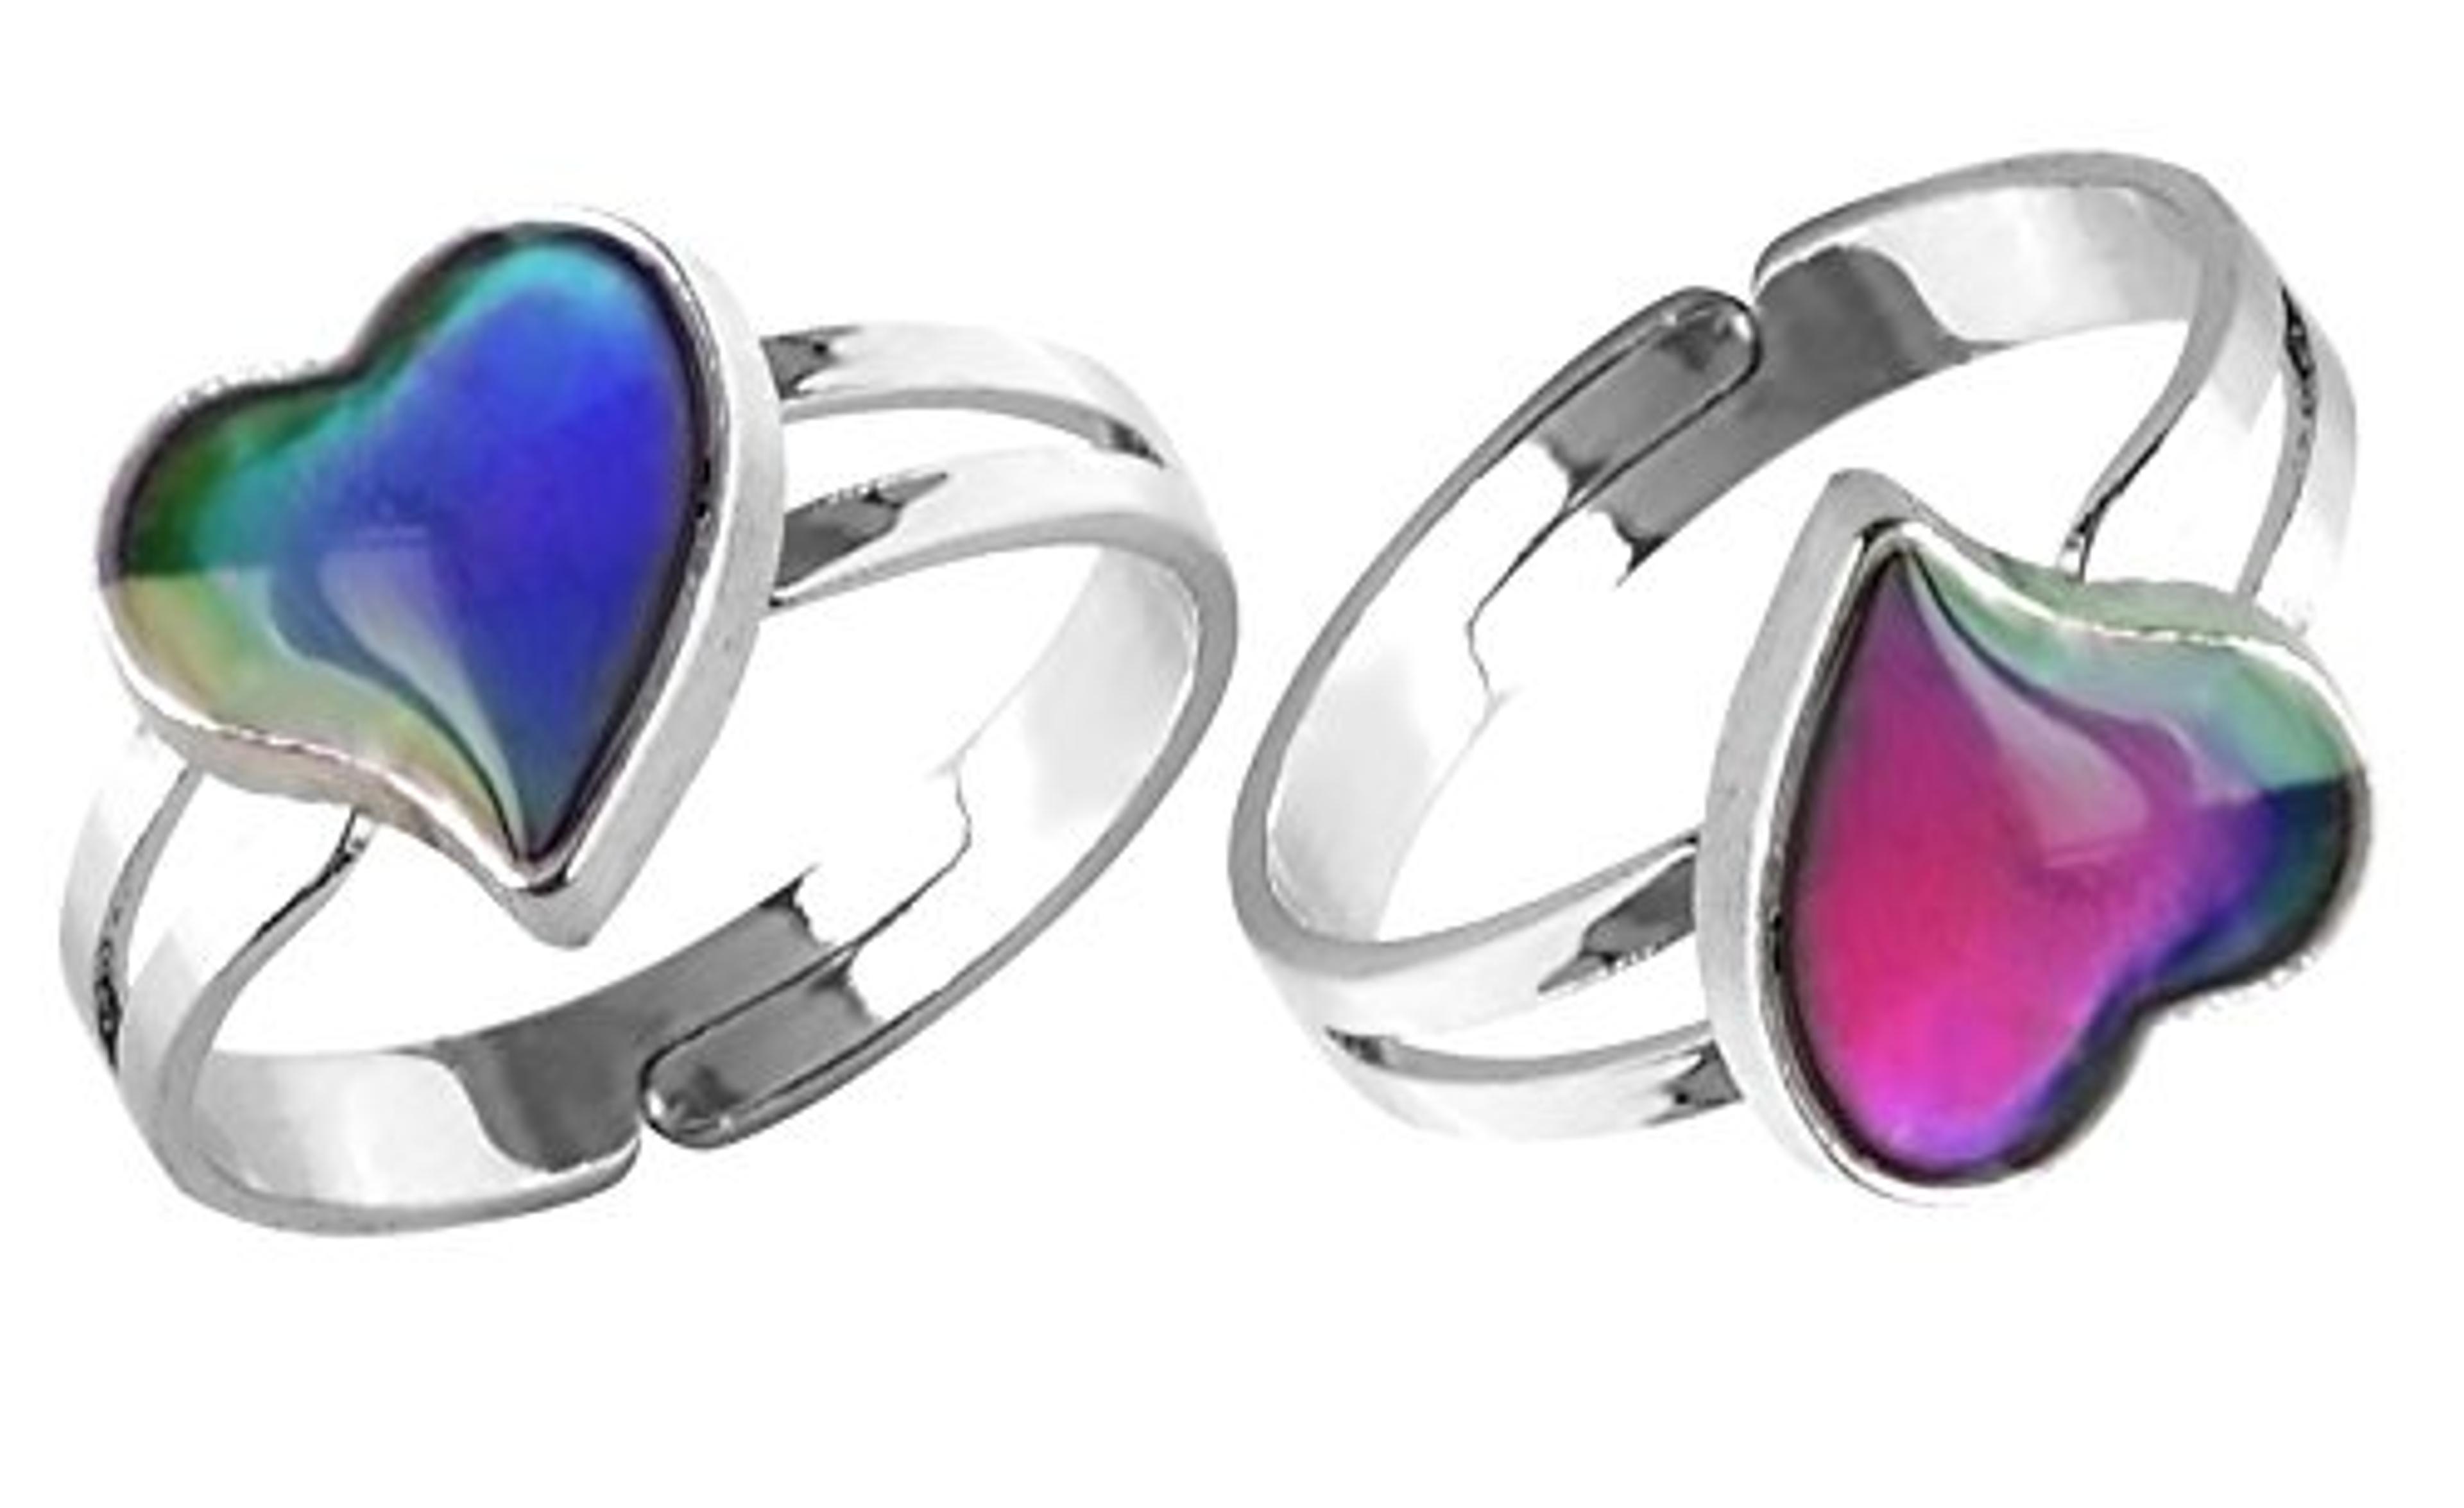 Acchen Mood Ring Heart Shaped Changing Color Emotion Feeling Finger Ring 2 Pcs with Box